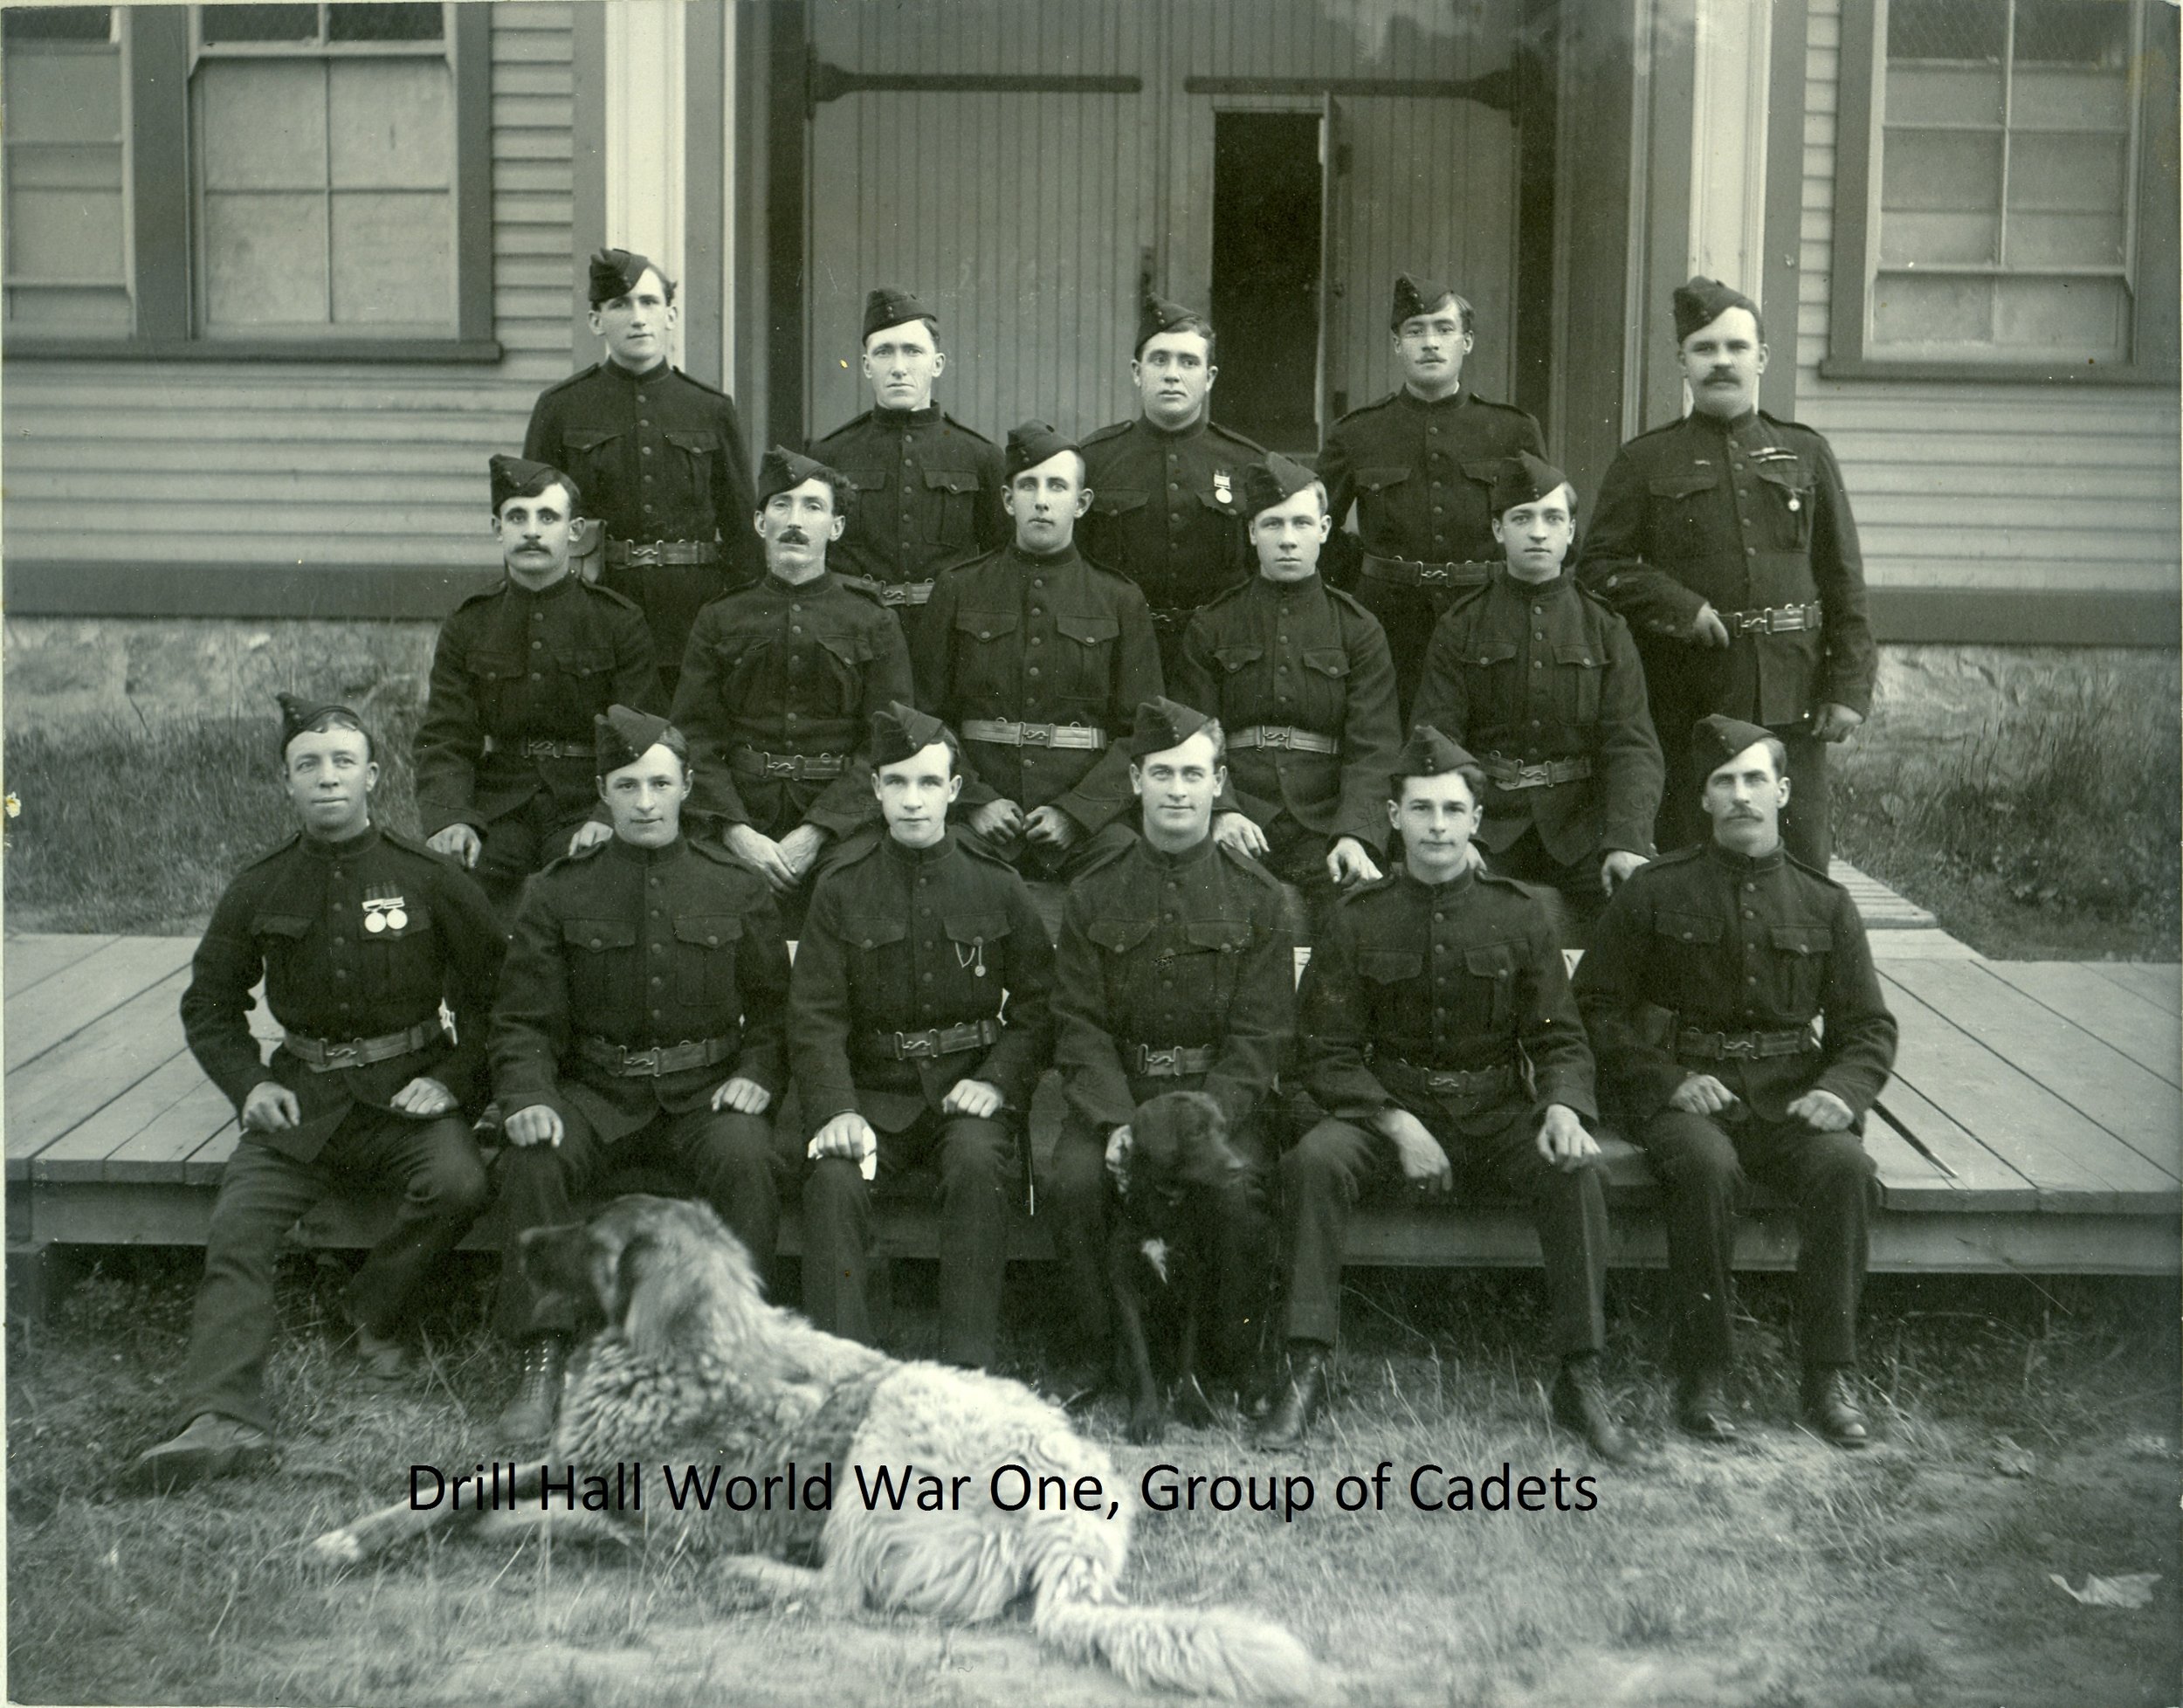 53 Drill Hall World War One, Group of Cadets.jpg